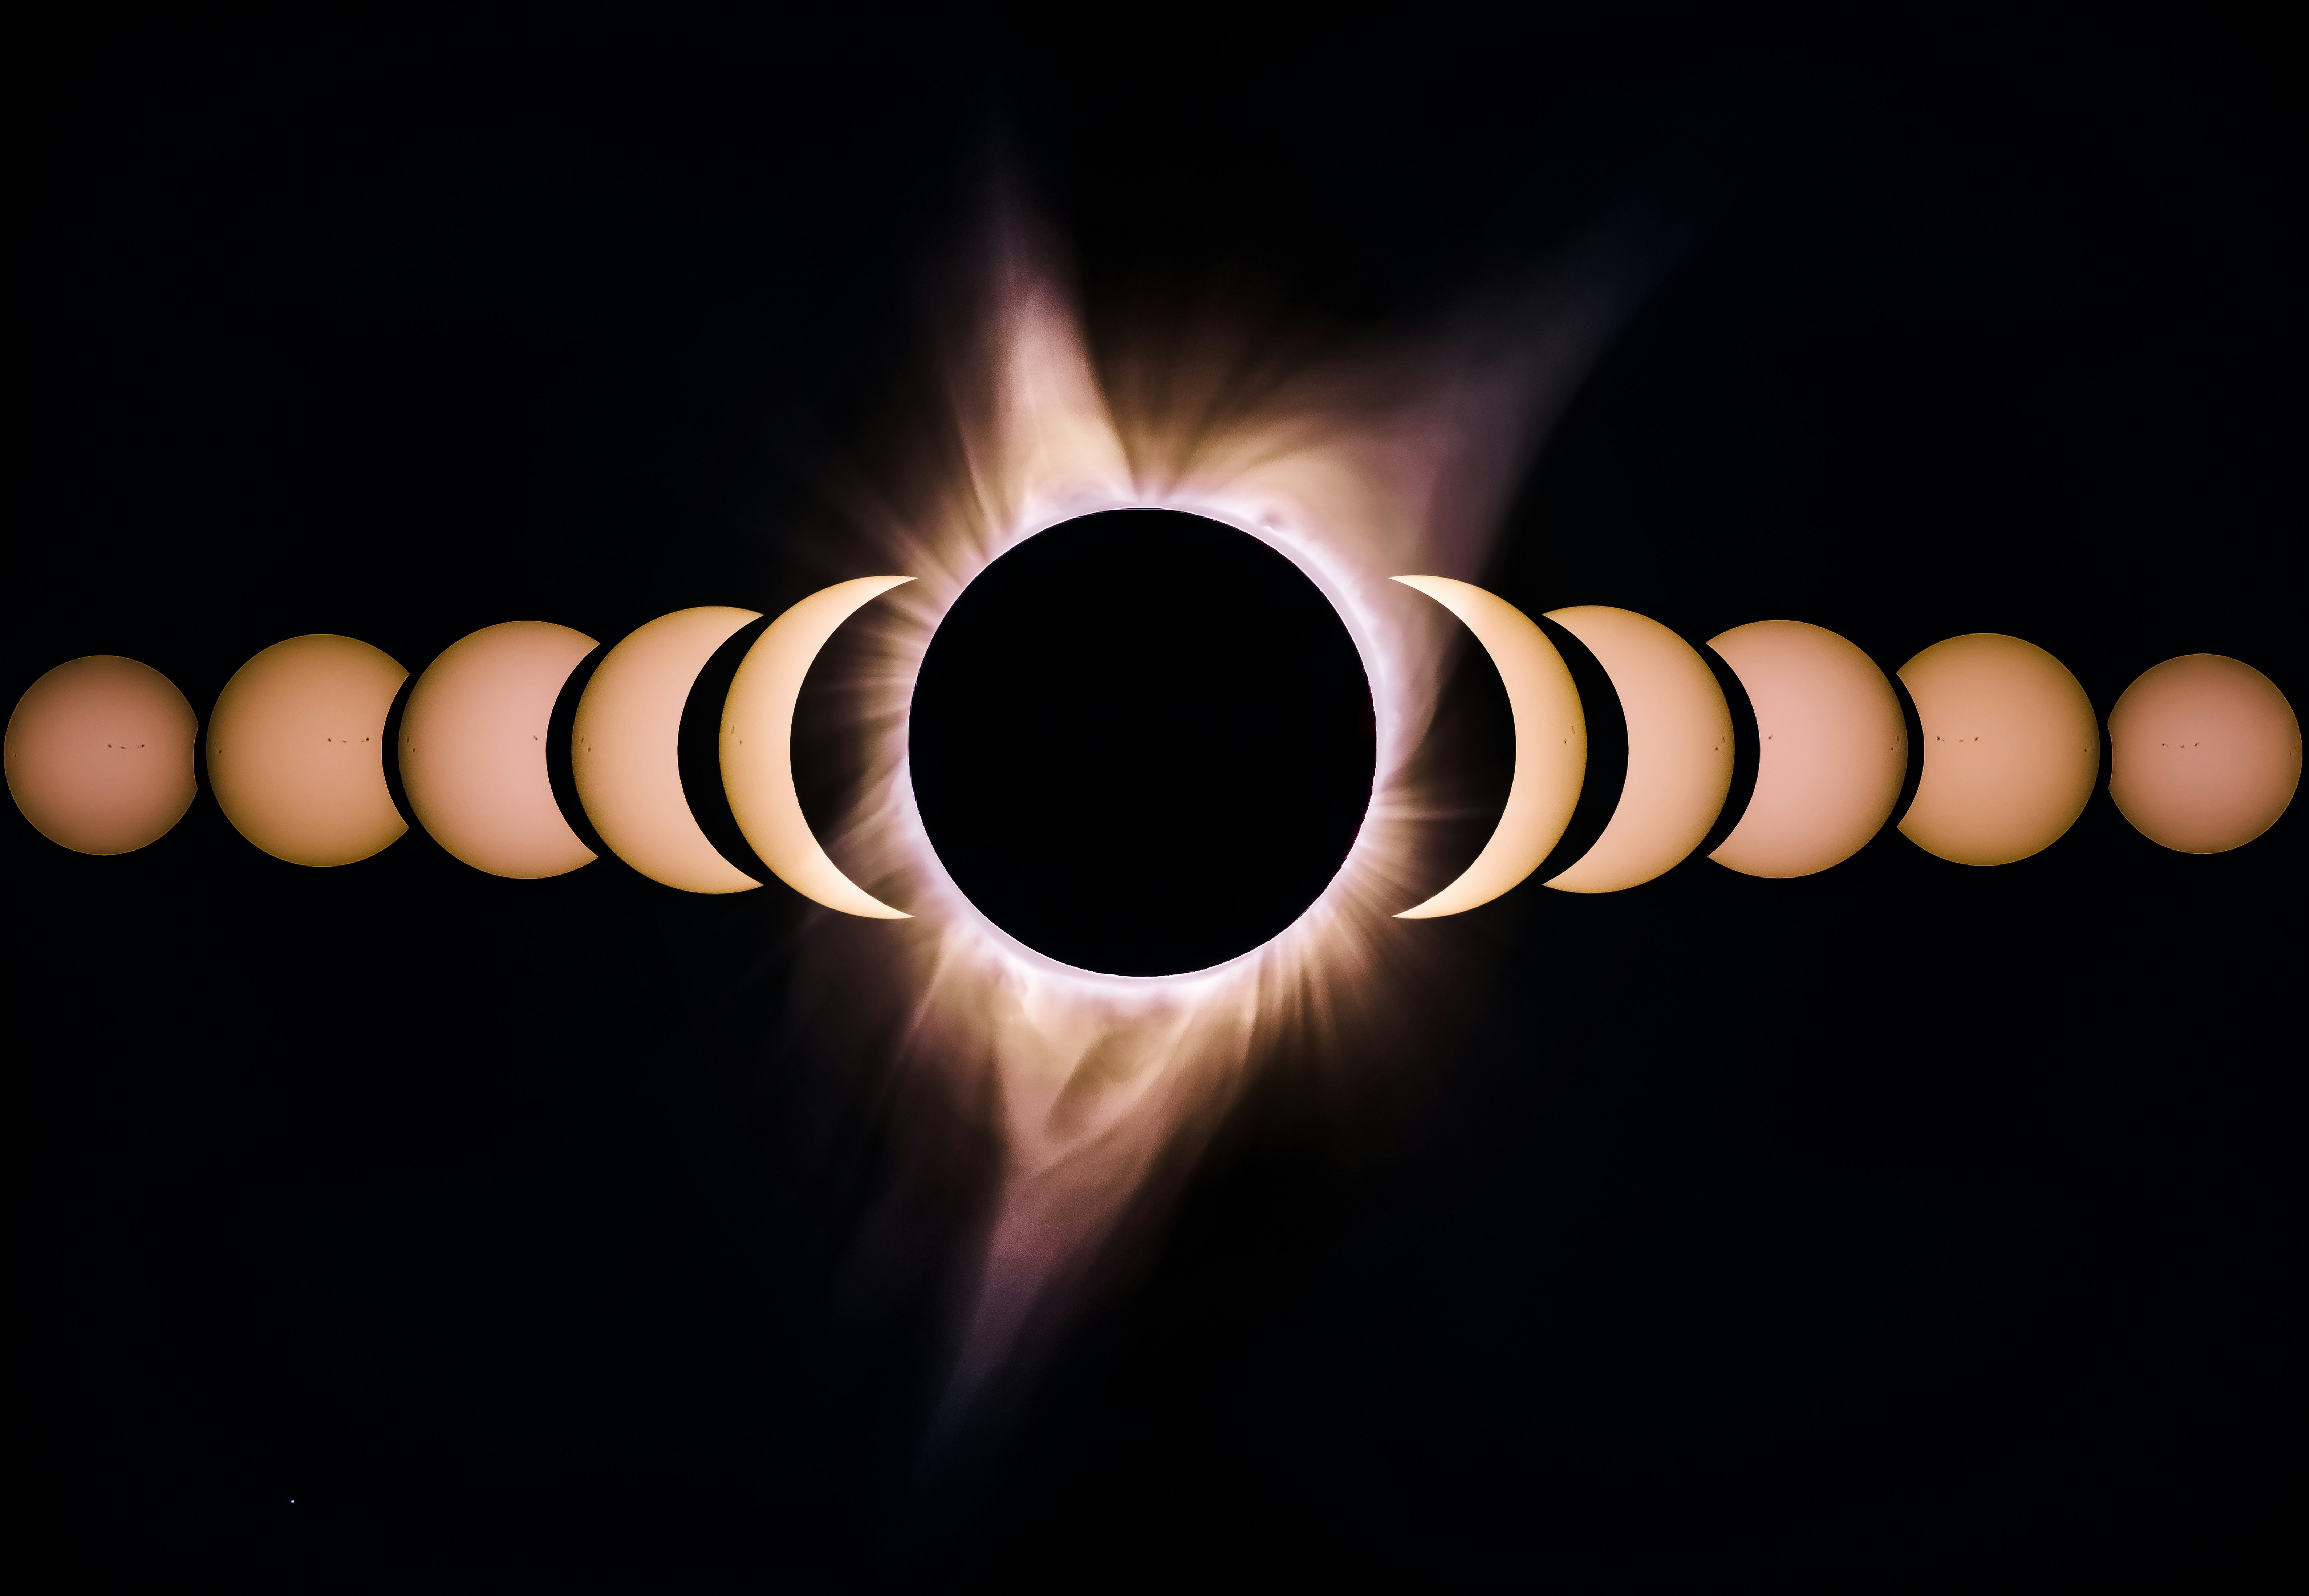 This is a composition I made during the eclipse. It shows the beginning of the eclipse all the way to totality in the center. Each photo was taken about 10 minutes apart. I took these photos at Crooked River Ranch in Oregon. I just happened to find this spot on Google maps. I am very pleased with the outcome. I’m on IG @bryangoffphoto Stop by and say hi!